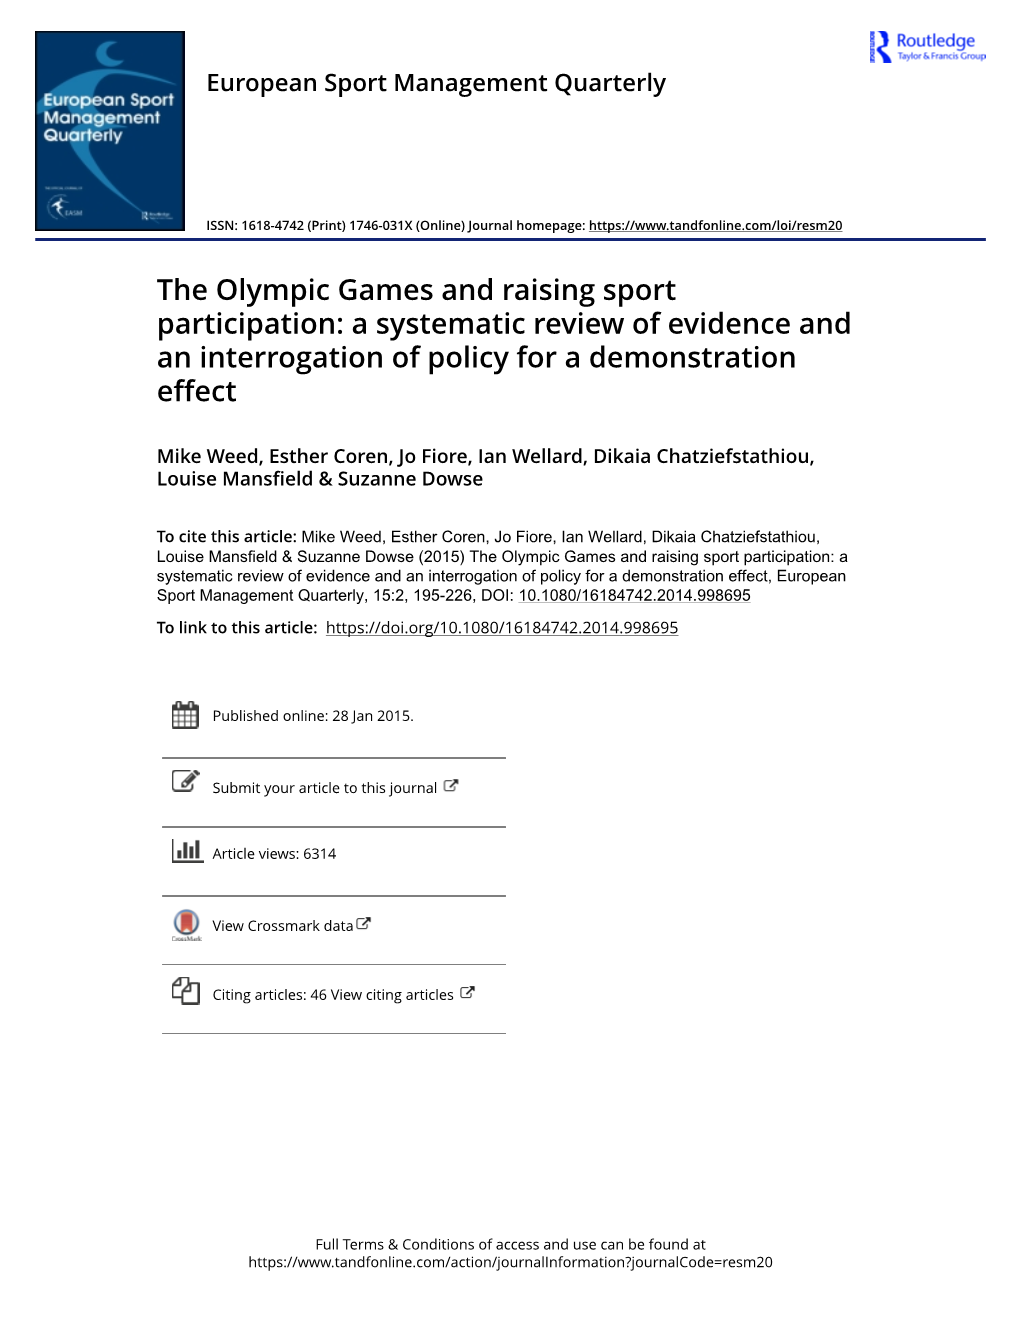 The Olympic Games and Raising Sport Participation: a Systematic Review of Evidence and an Interrogation of Policy for a Demonstration Effect